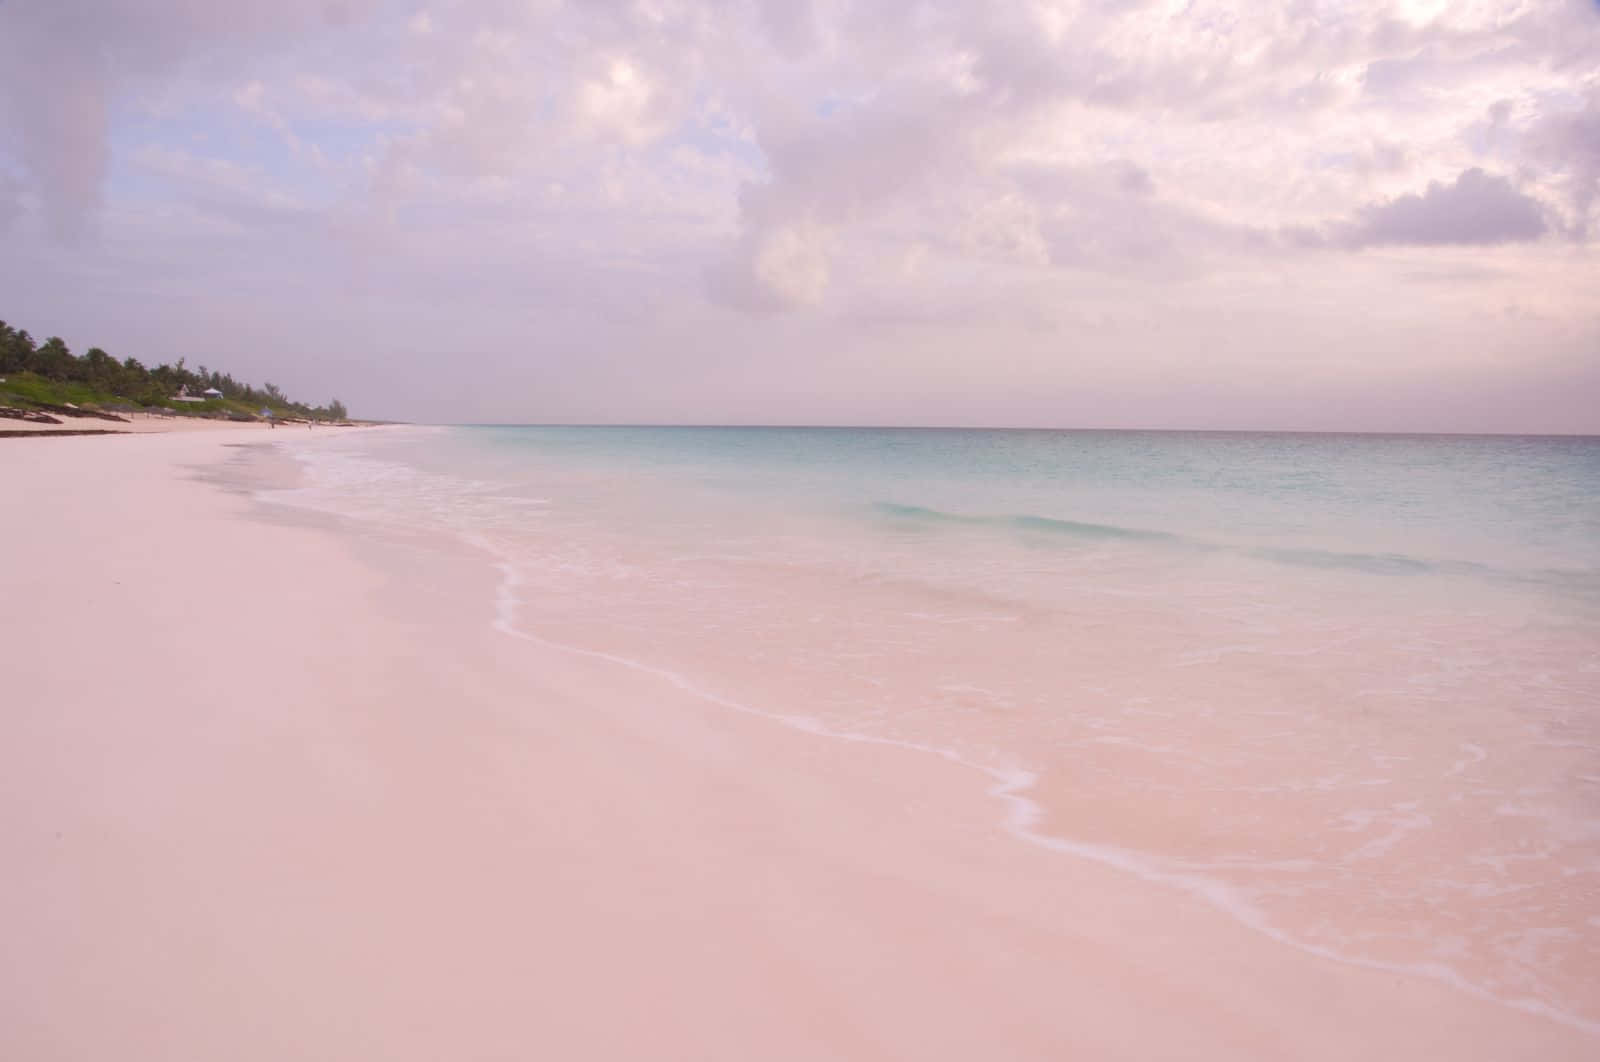 A Scenic View of the Pink Sand Beach and Crystal Blue Waters Wallpaper